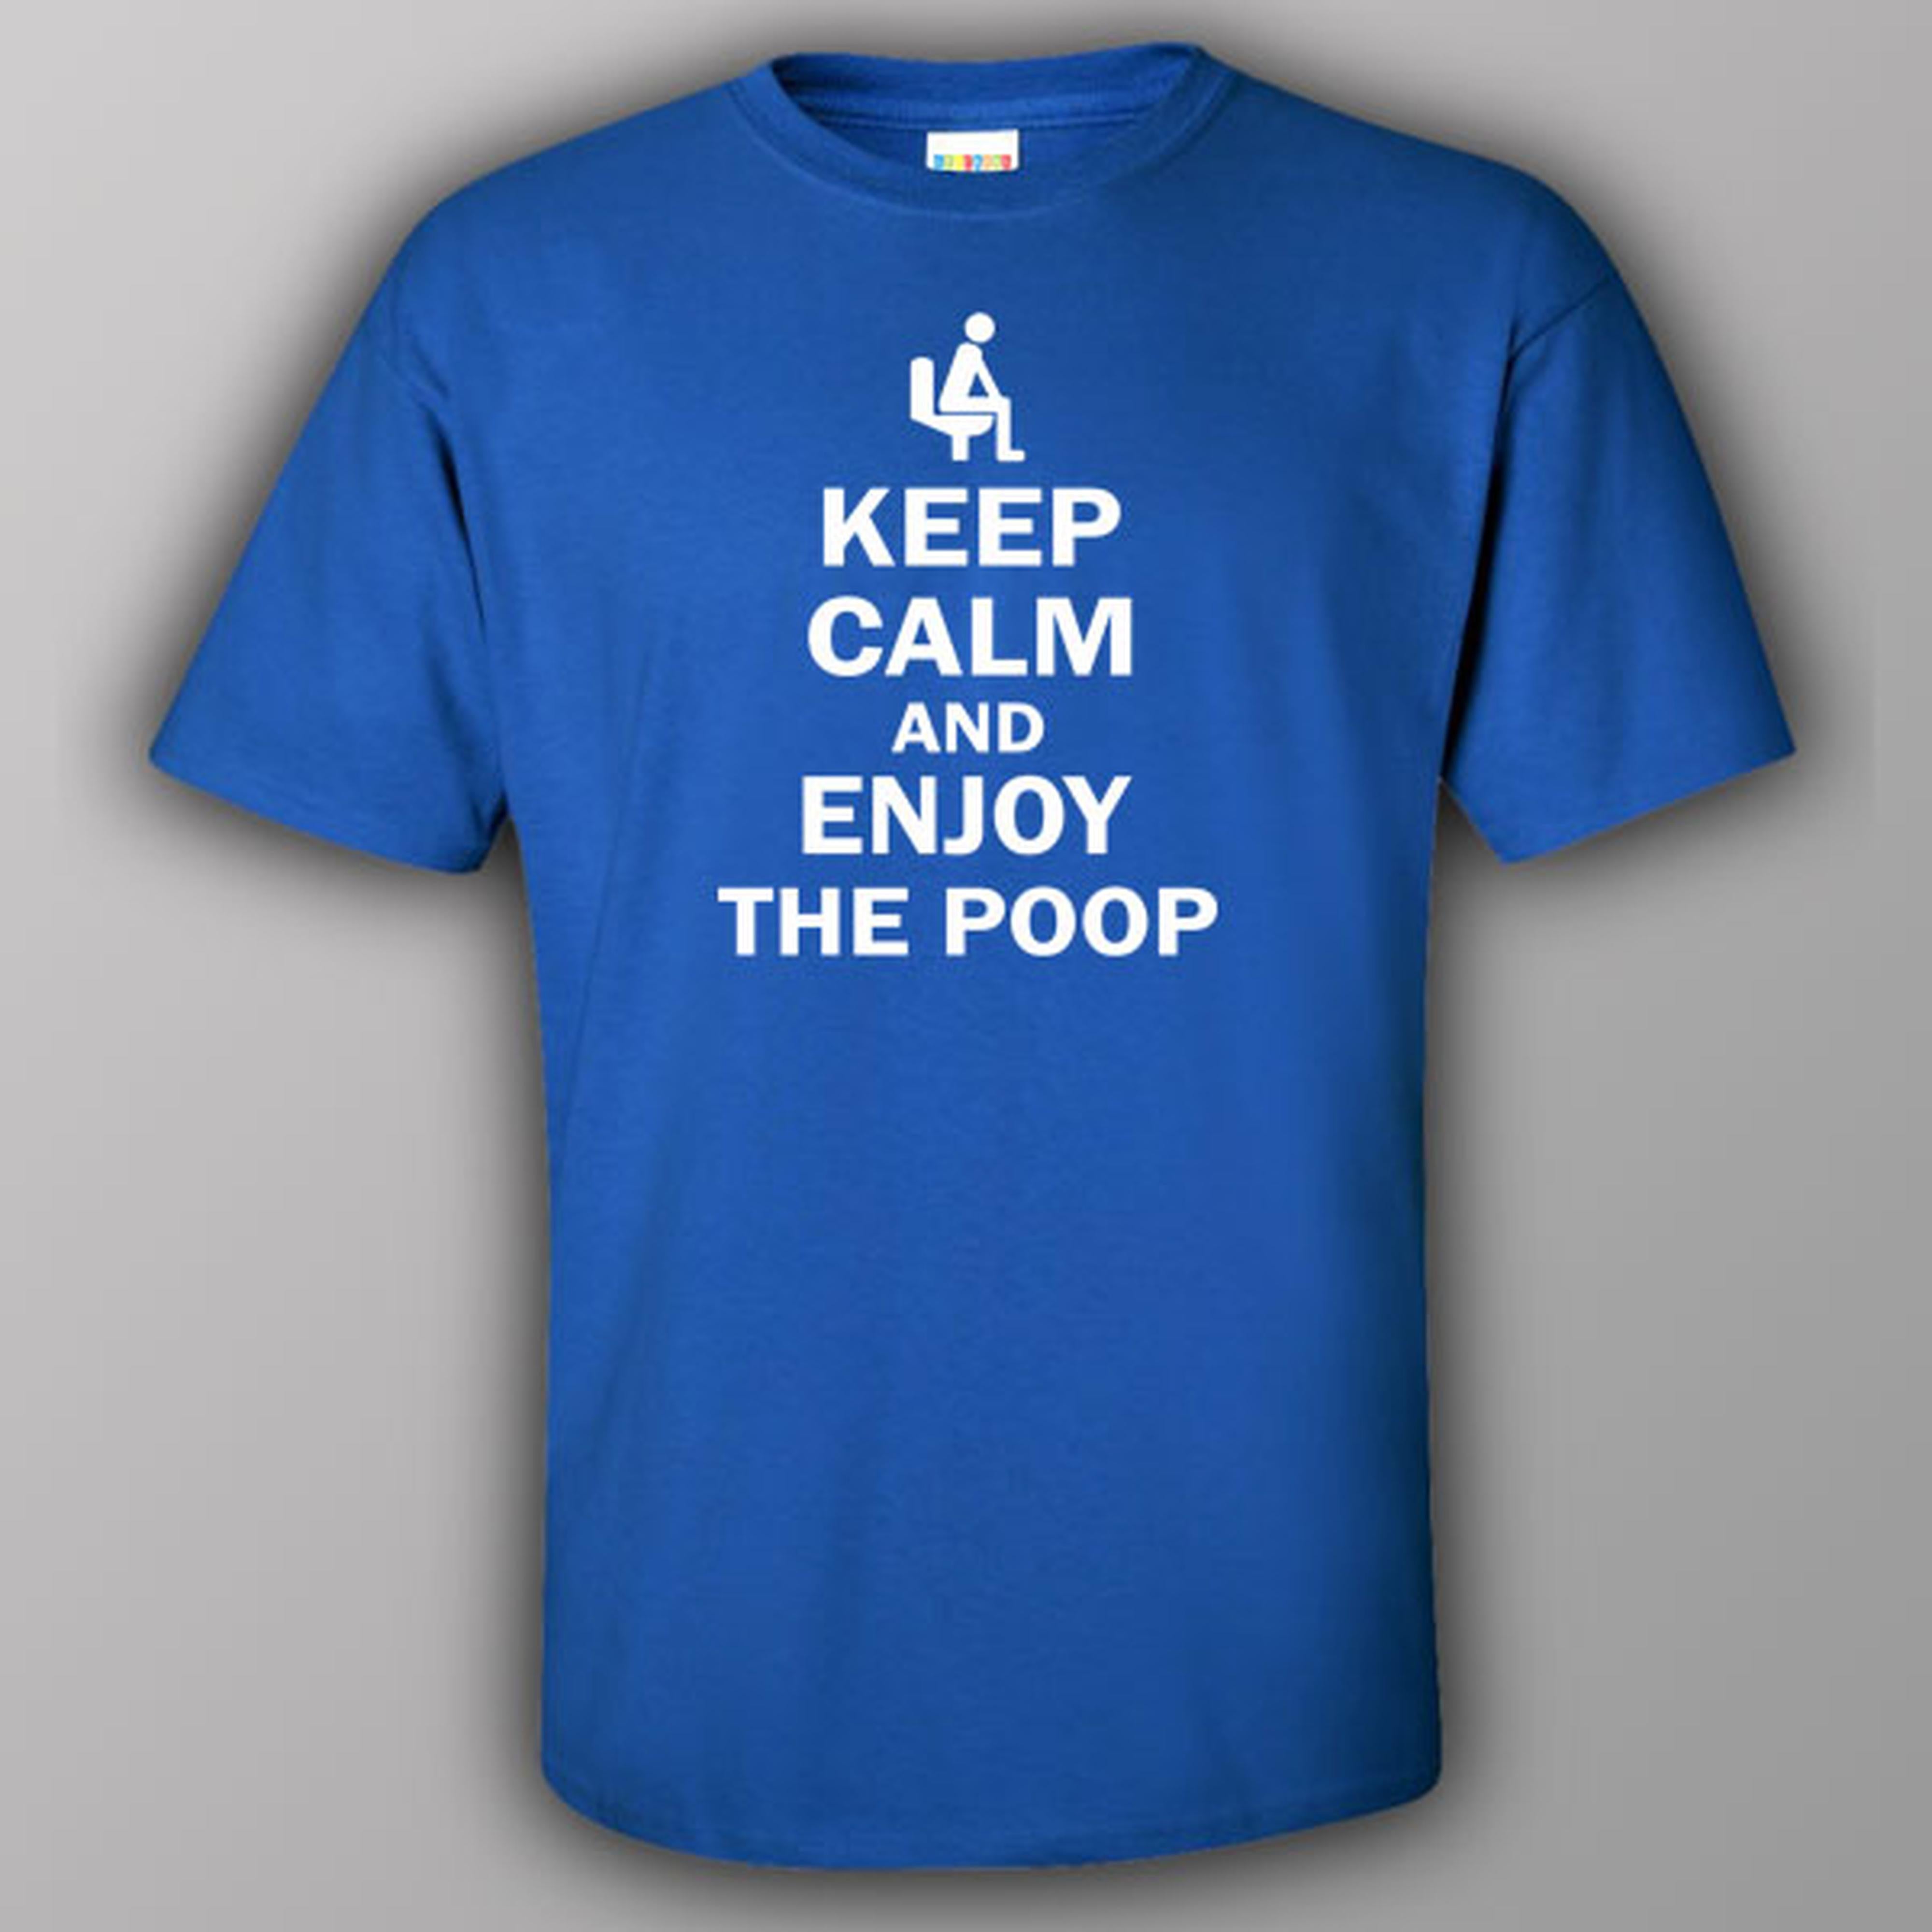 Keep calm and enjoy the poop - T-shirt